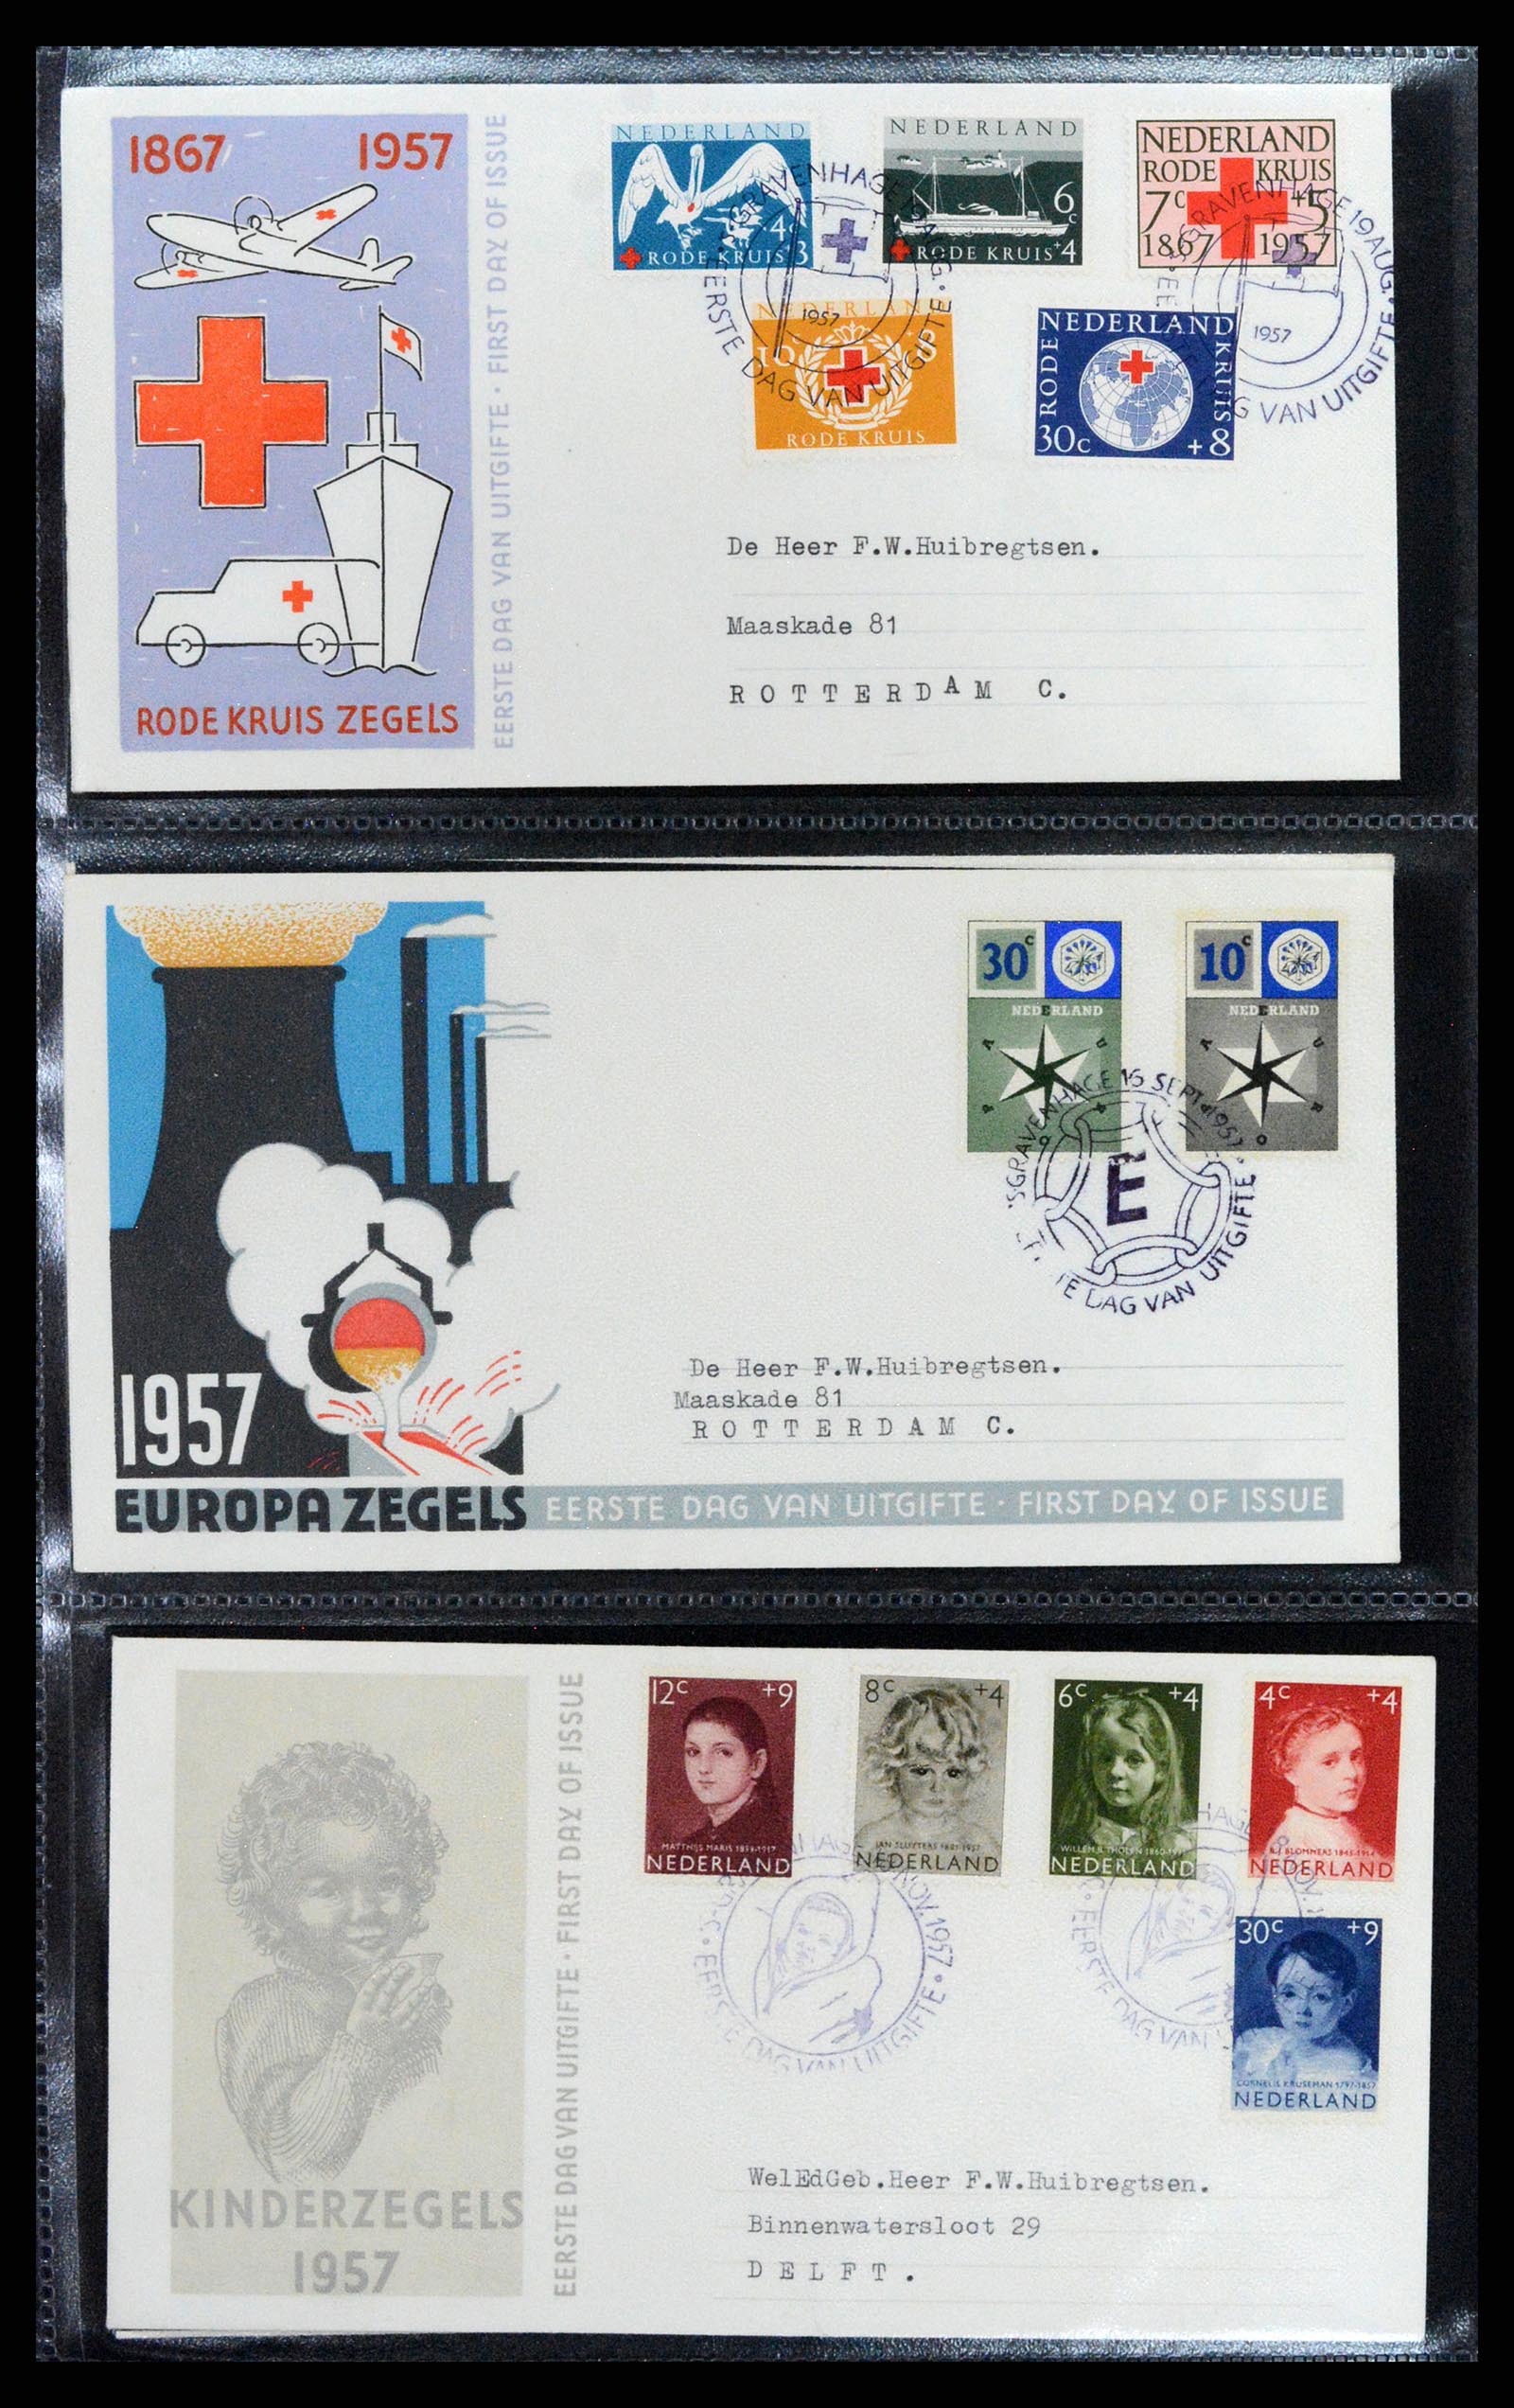 37710 013 - Stamp collection 37710 Netherlands FDC's 1949-1976.